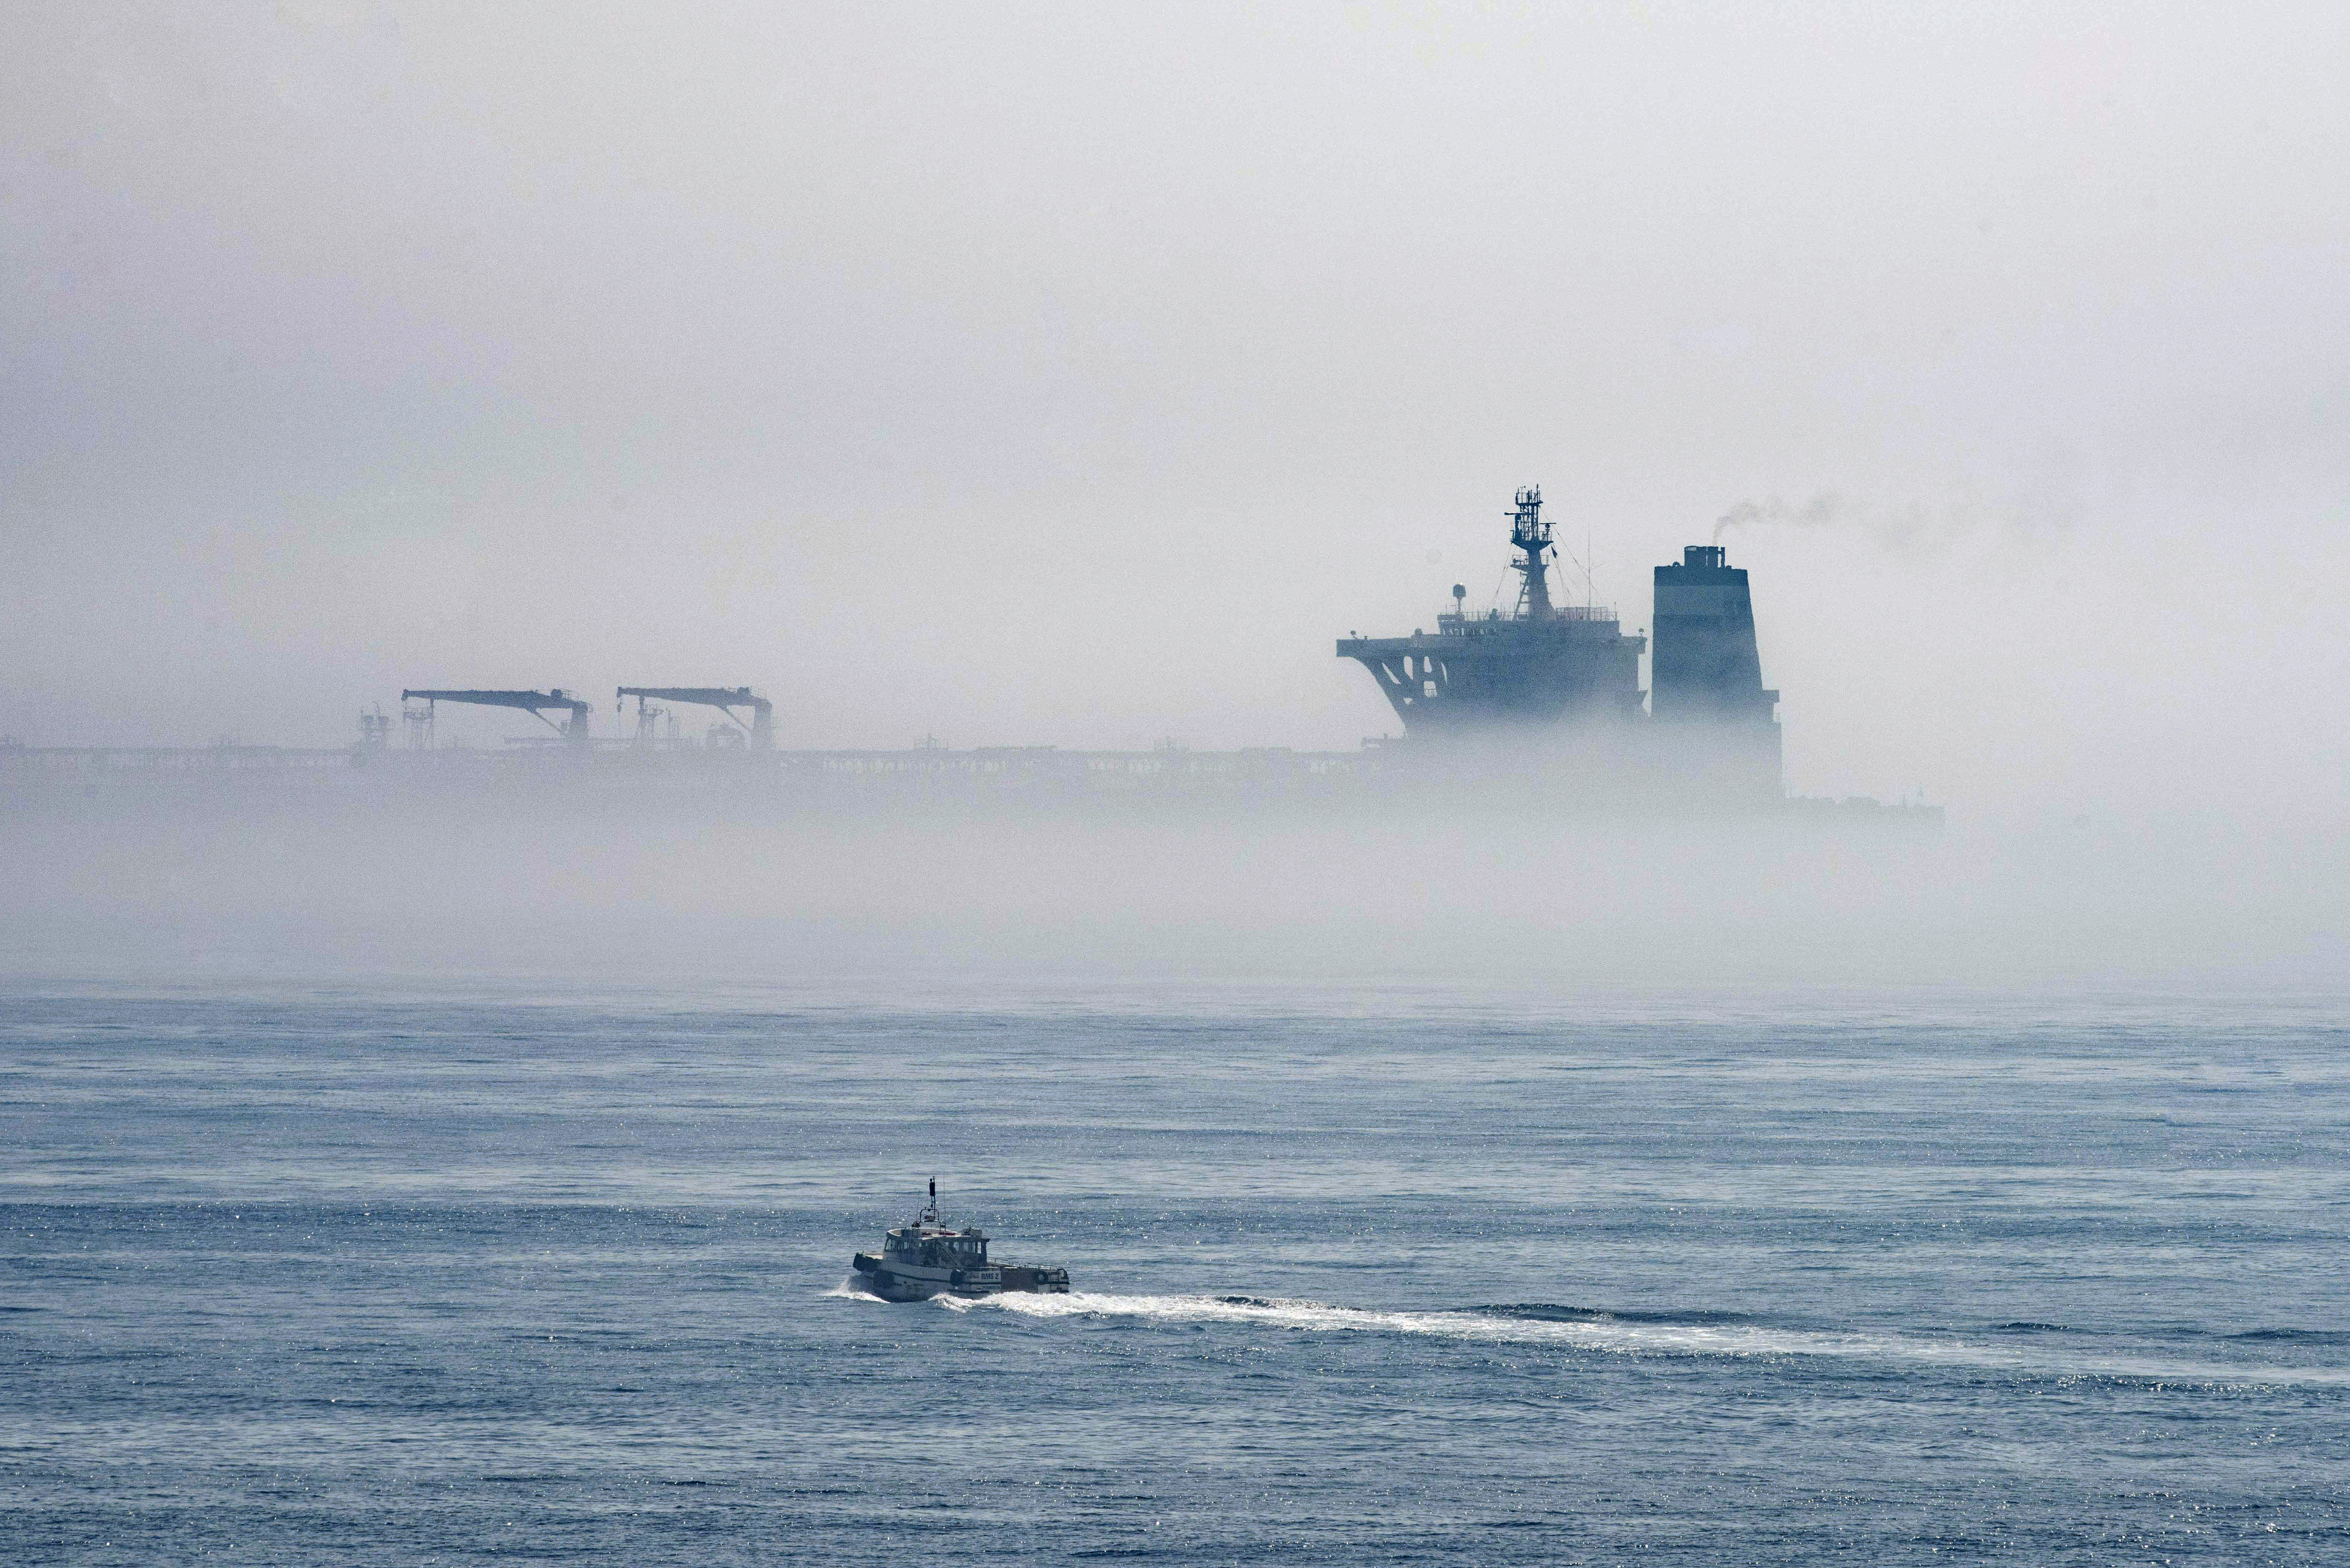 A view of the Grace 1 supertanker is seen through the sea fog, in the British territory of Gibraltar, Thursday, Aug. 15, 2019, seized last month in a British Royal Navy operation off Gibraltar.  The United States moved on Thursday to halt the release of the Iranian supertanker Grace 1, detained in Gibraltar for breaching EU sanctions on oil shipments to Syria, thwarting efforts by authorities in London and the British overseas territory to defuse tensions with Tehran. (AP Photo/Marcos Moreno)